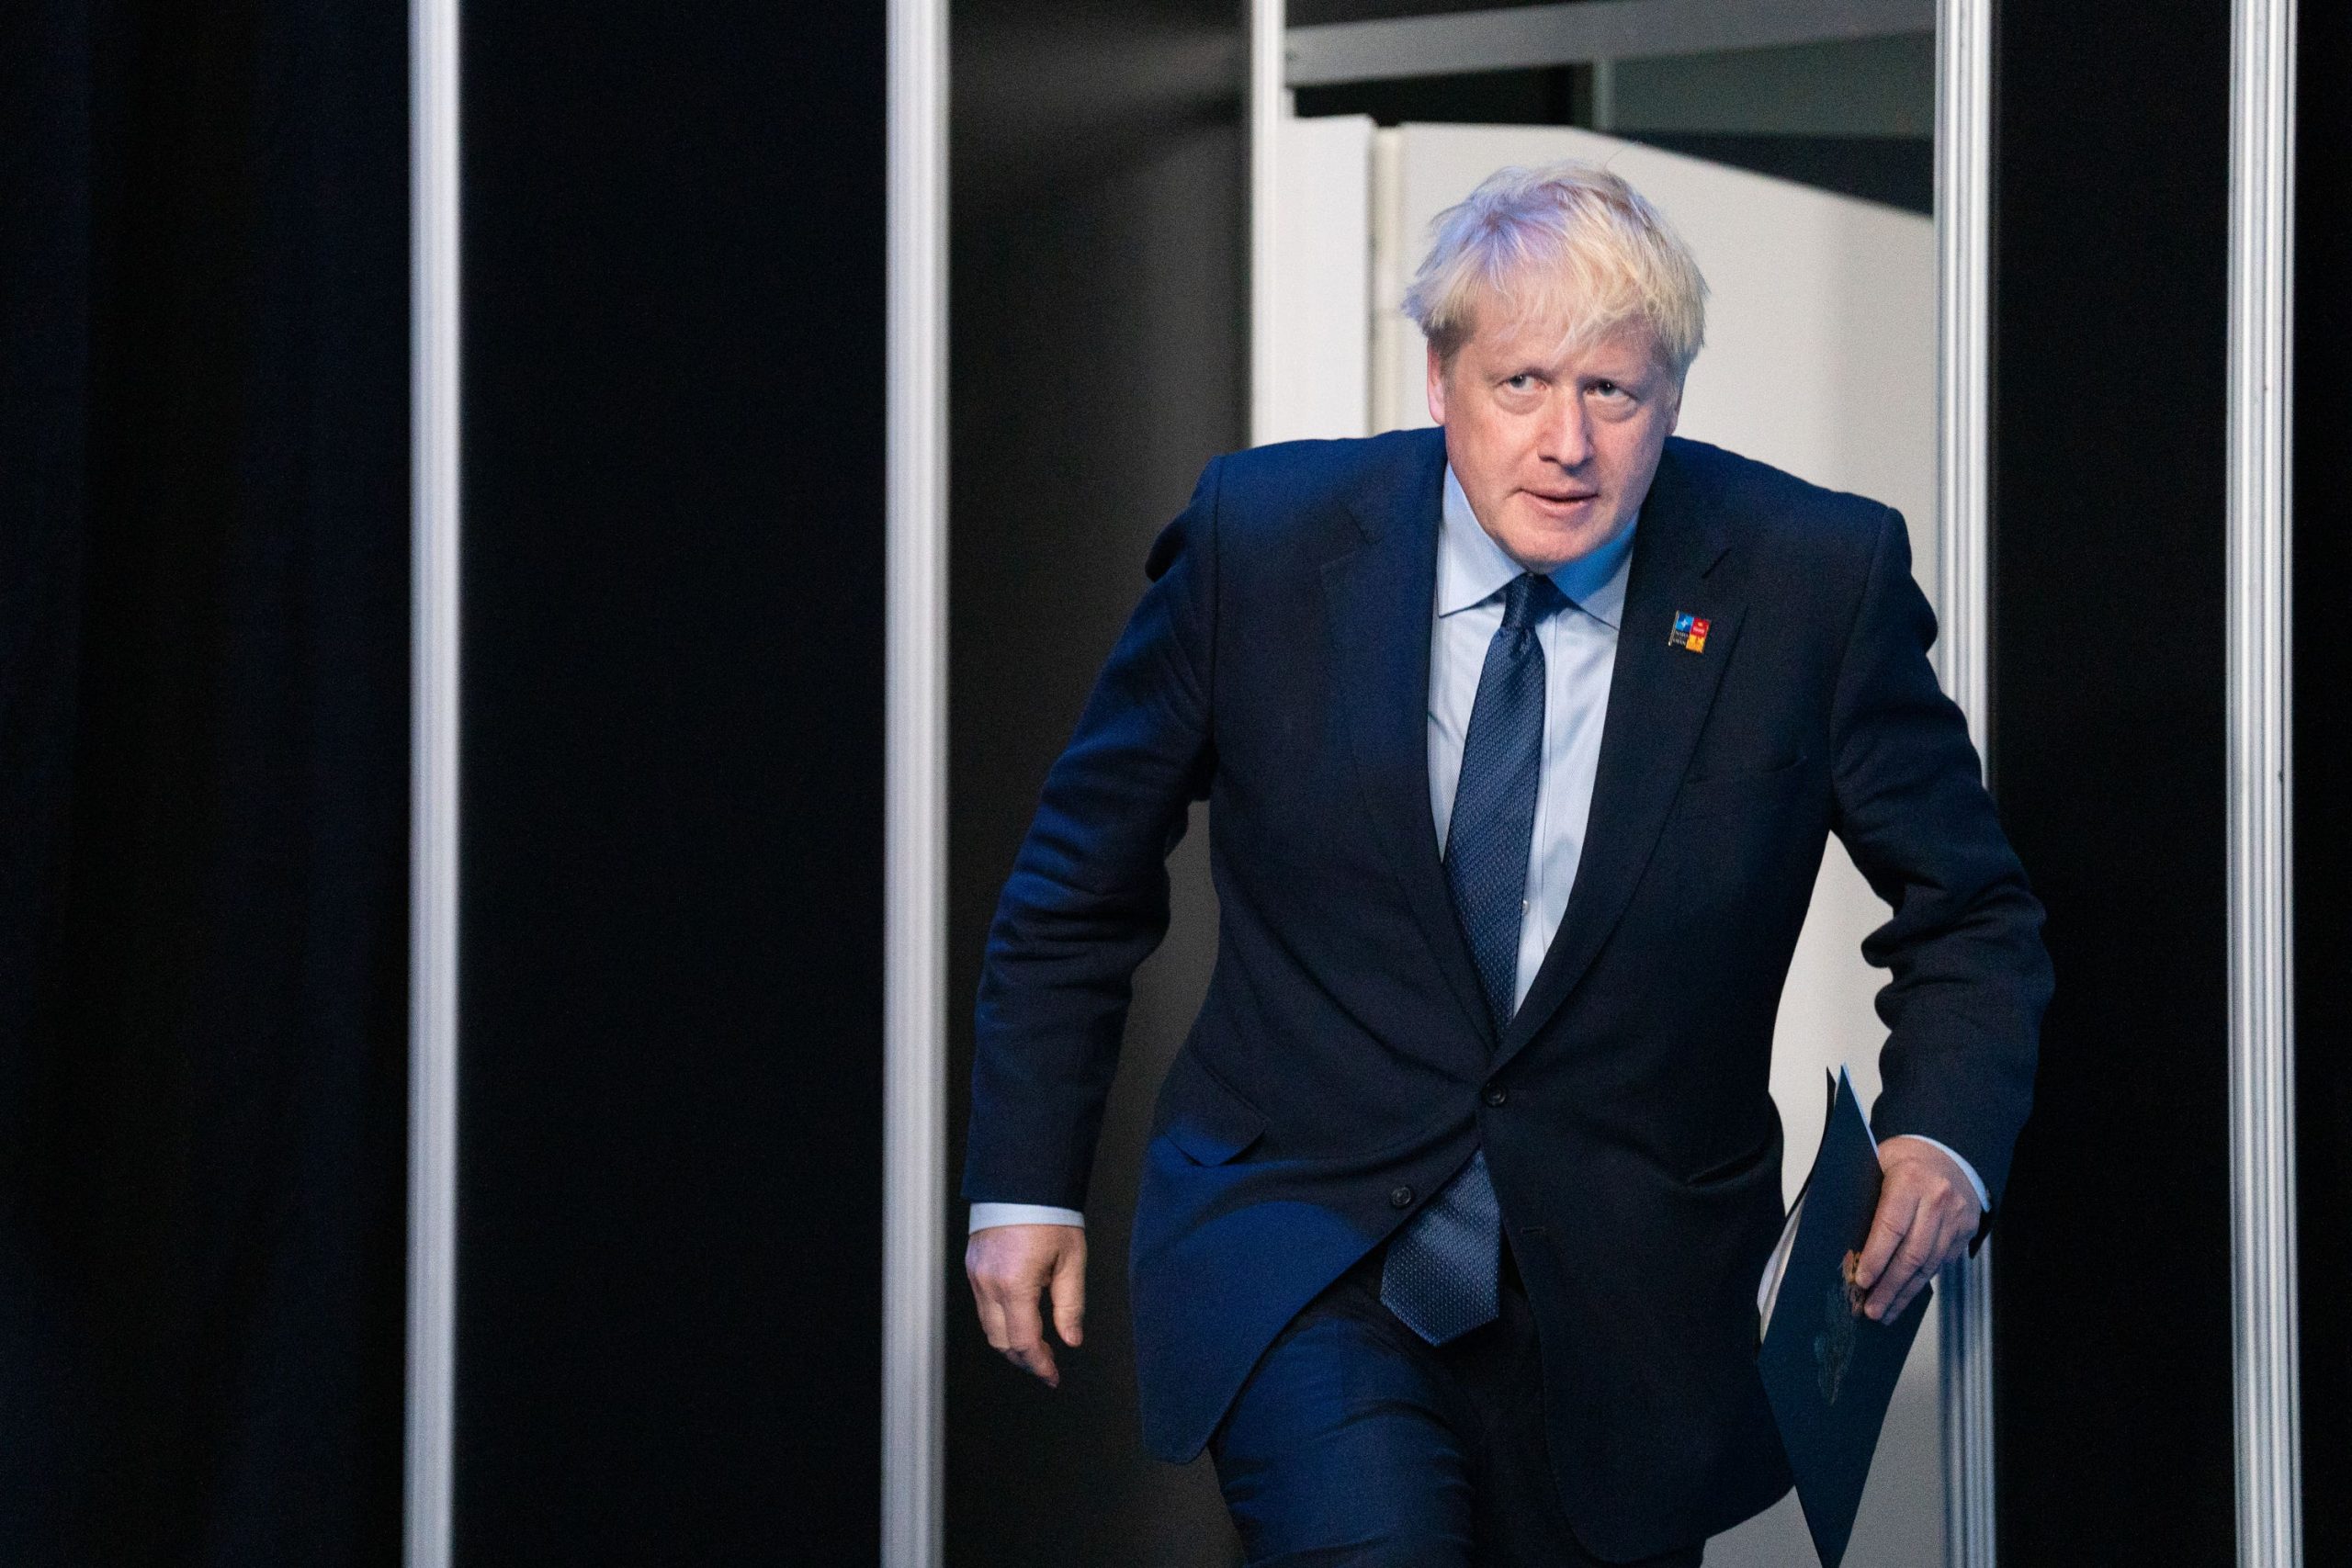 Boris Johnson says he does not want to resign and will stay on if the membership backs him